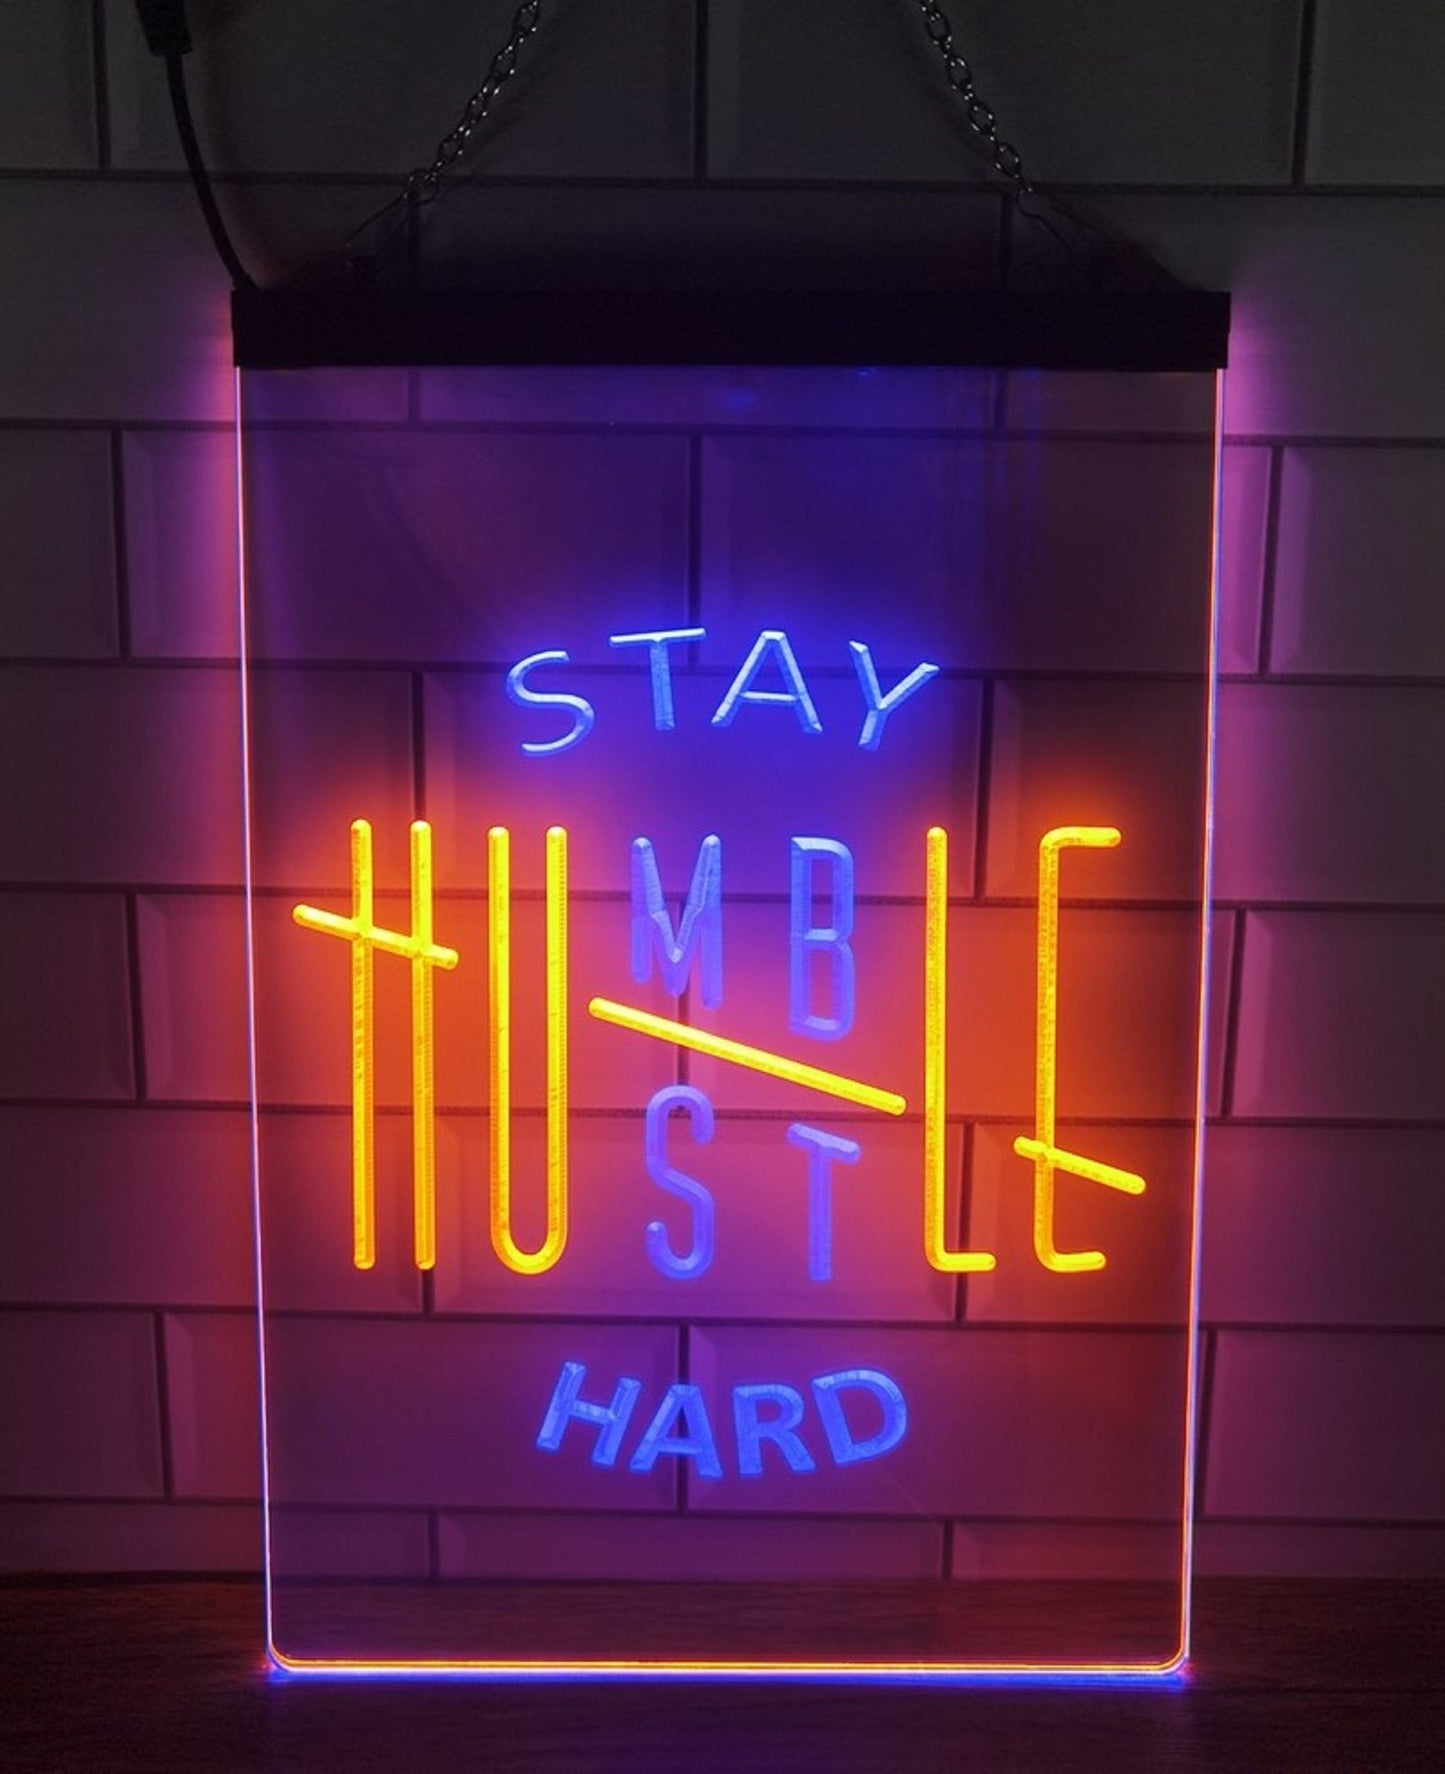 Neon Sign Dual Color Stay Humble Hustle Hard Wall Hanging Table Top Decor